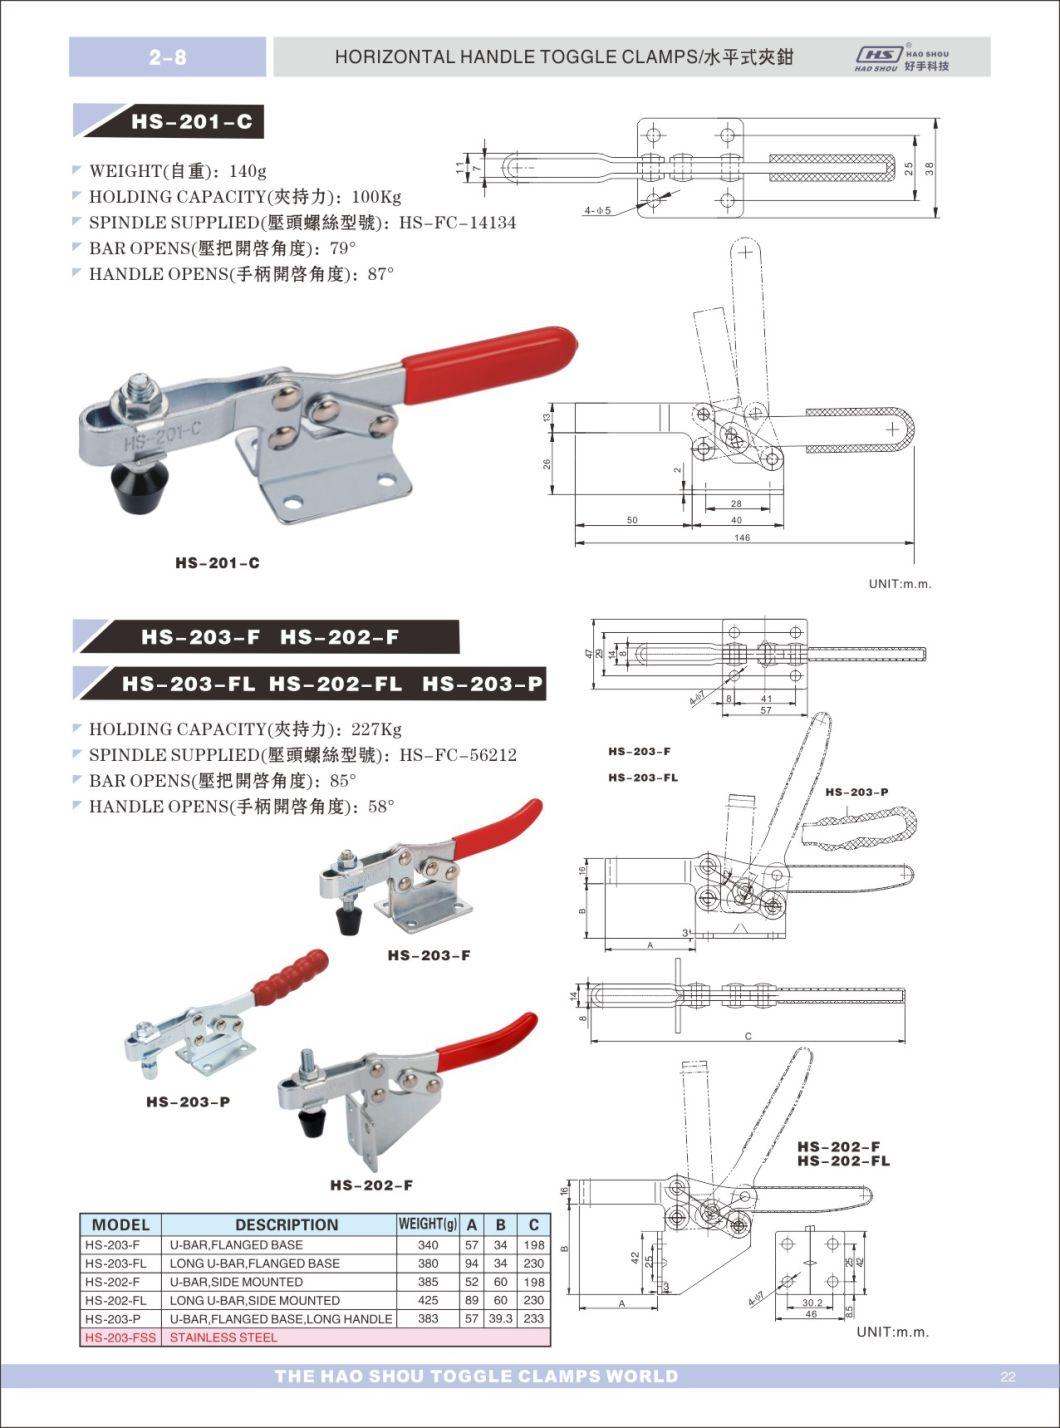 Haoshou HS-203-P Taiwan Quick Jig Red Handle Fast Fixture Heavy Duty Adjustable Toggle Clamps Horizontal Used on Welding Jig